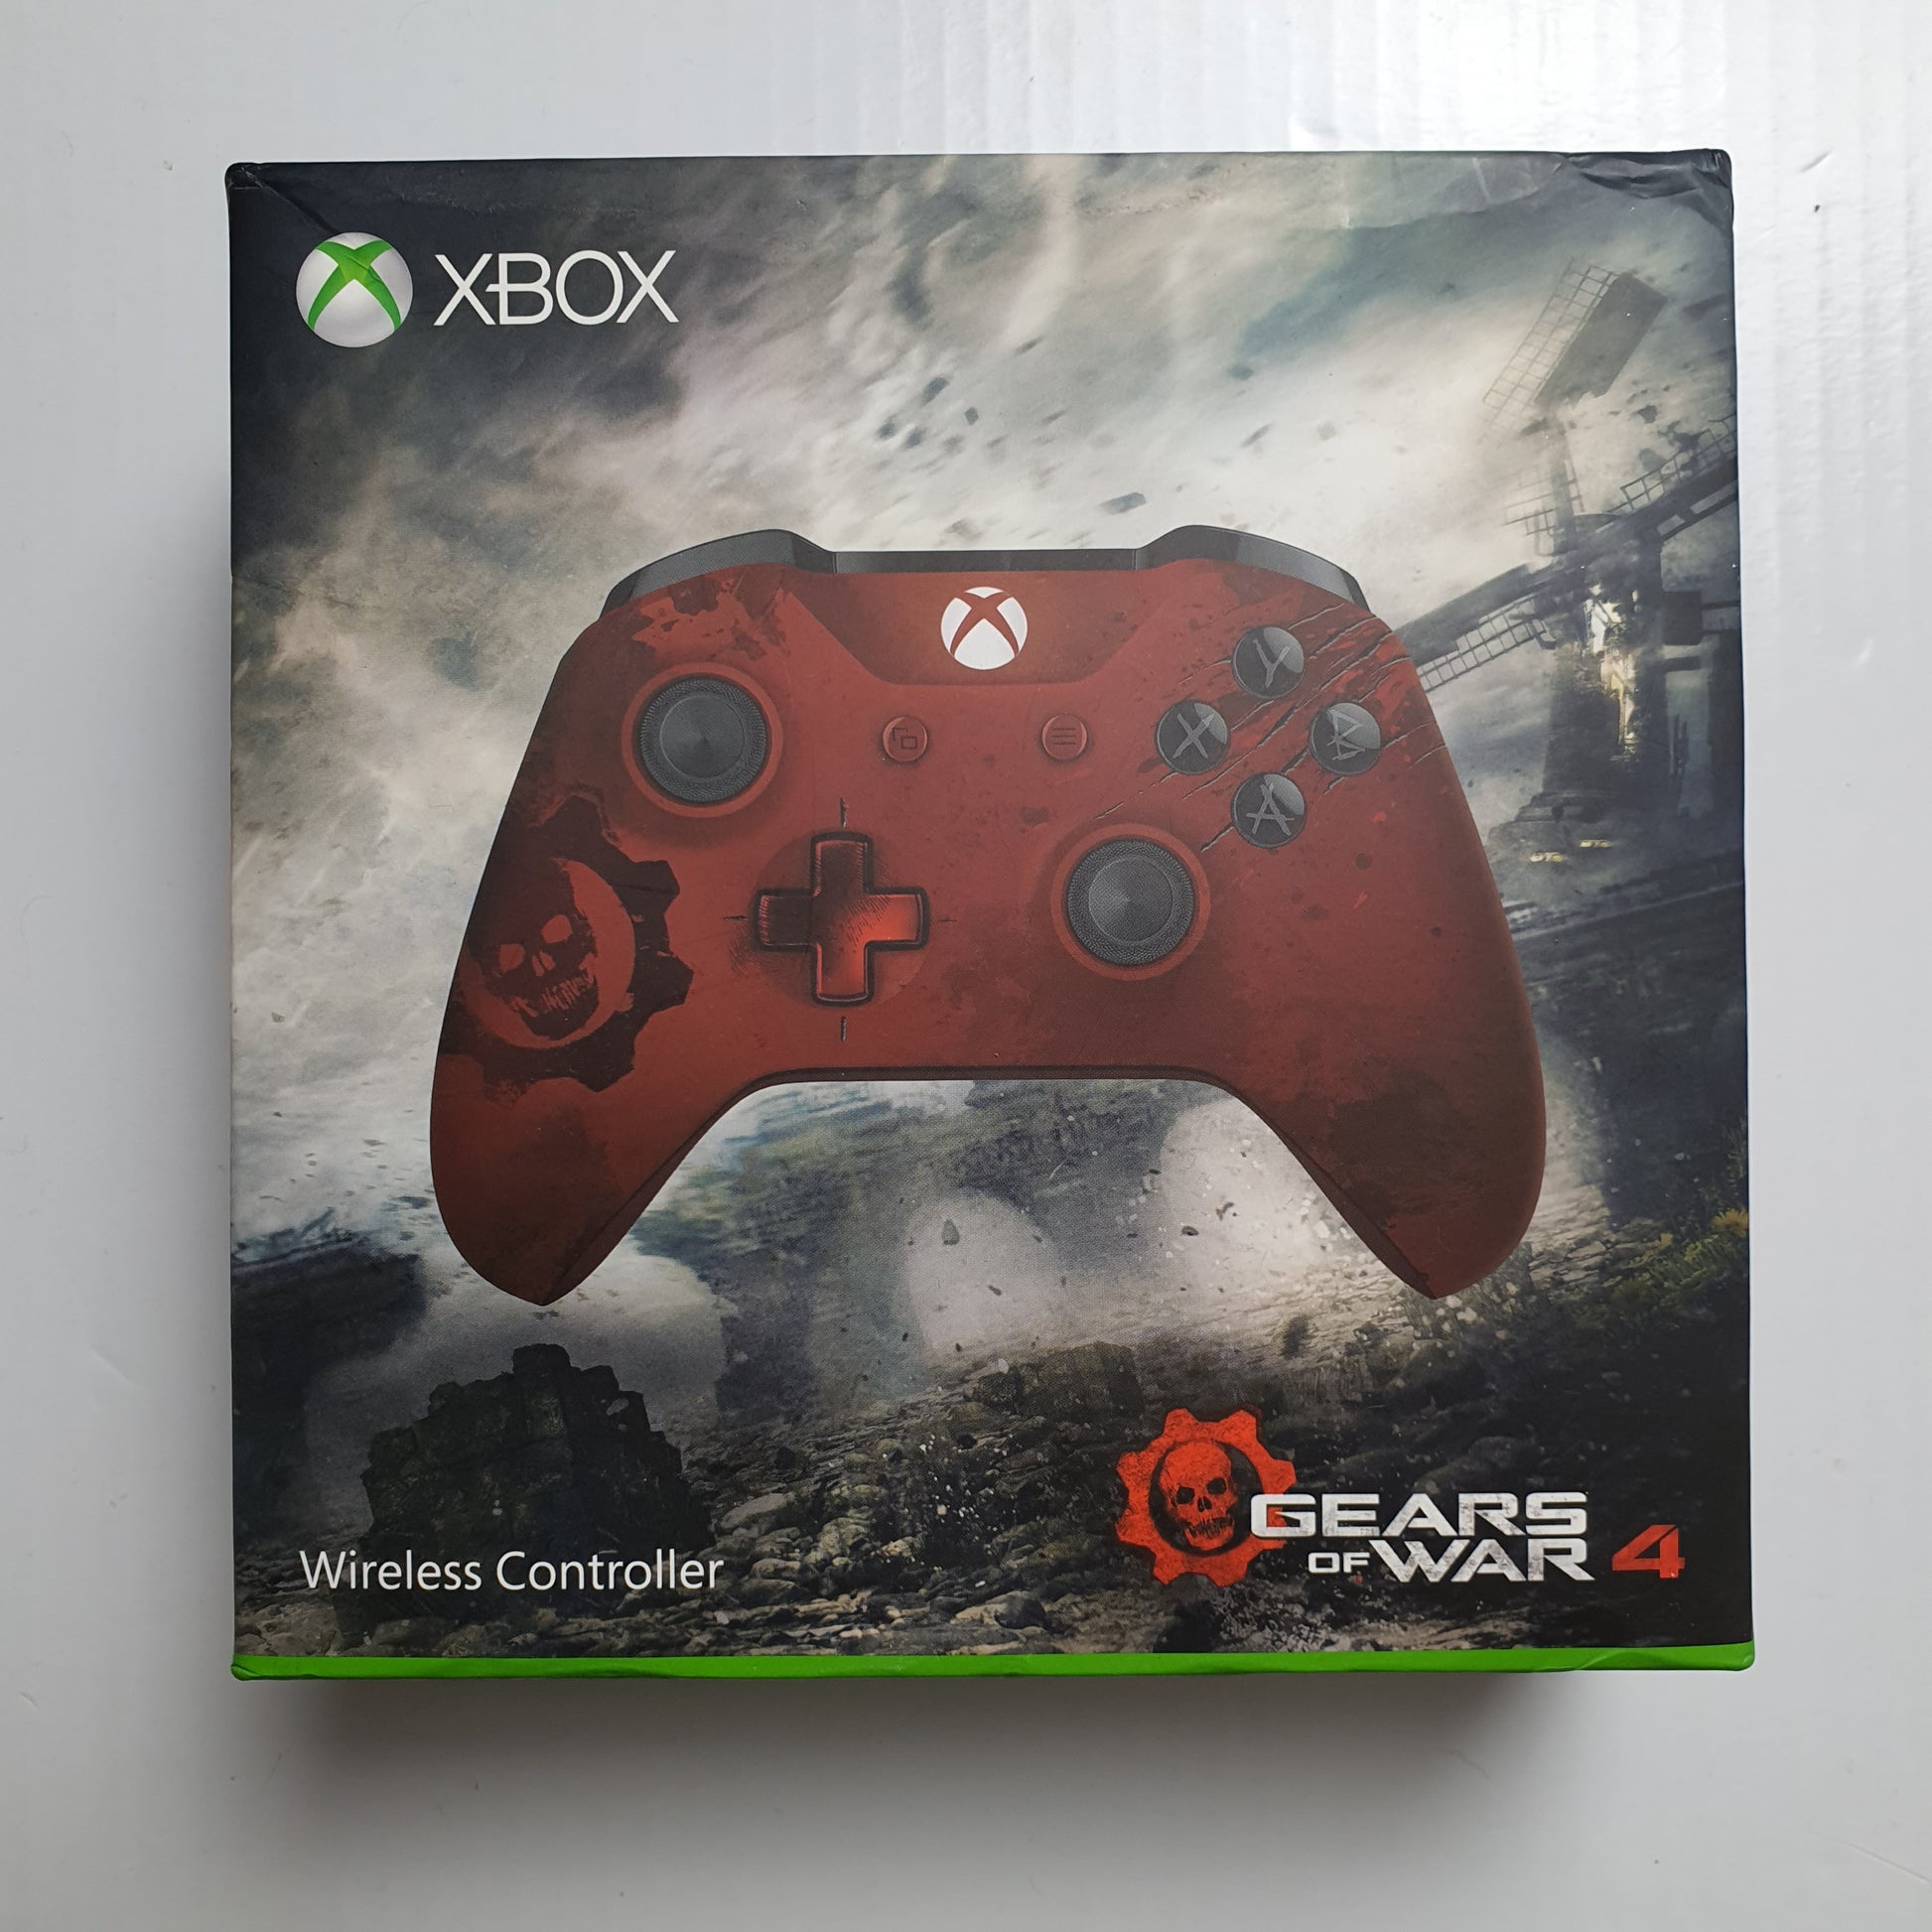 Gears of War 4 XBOX ONE XBox1 Game with Box